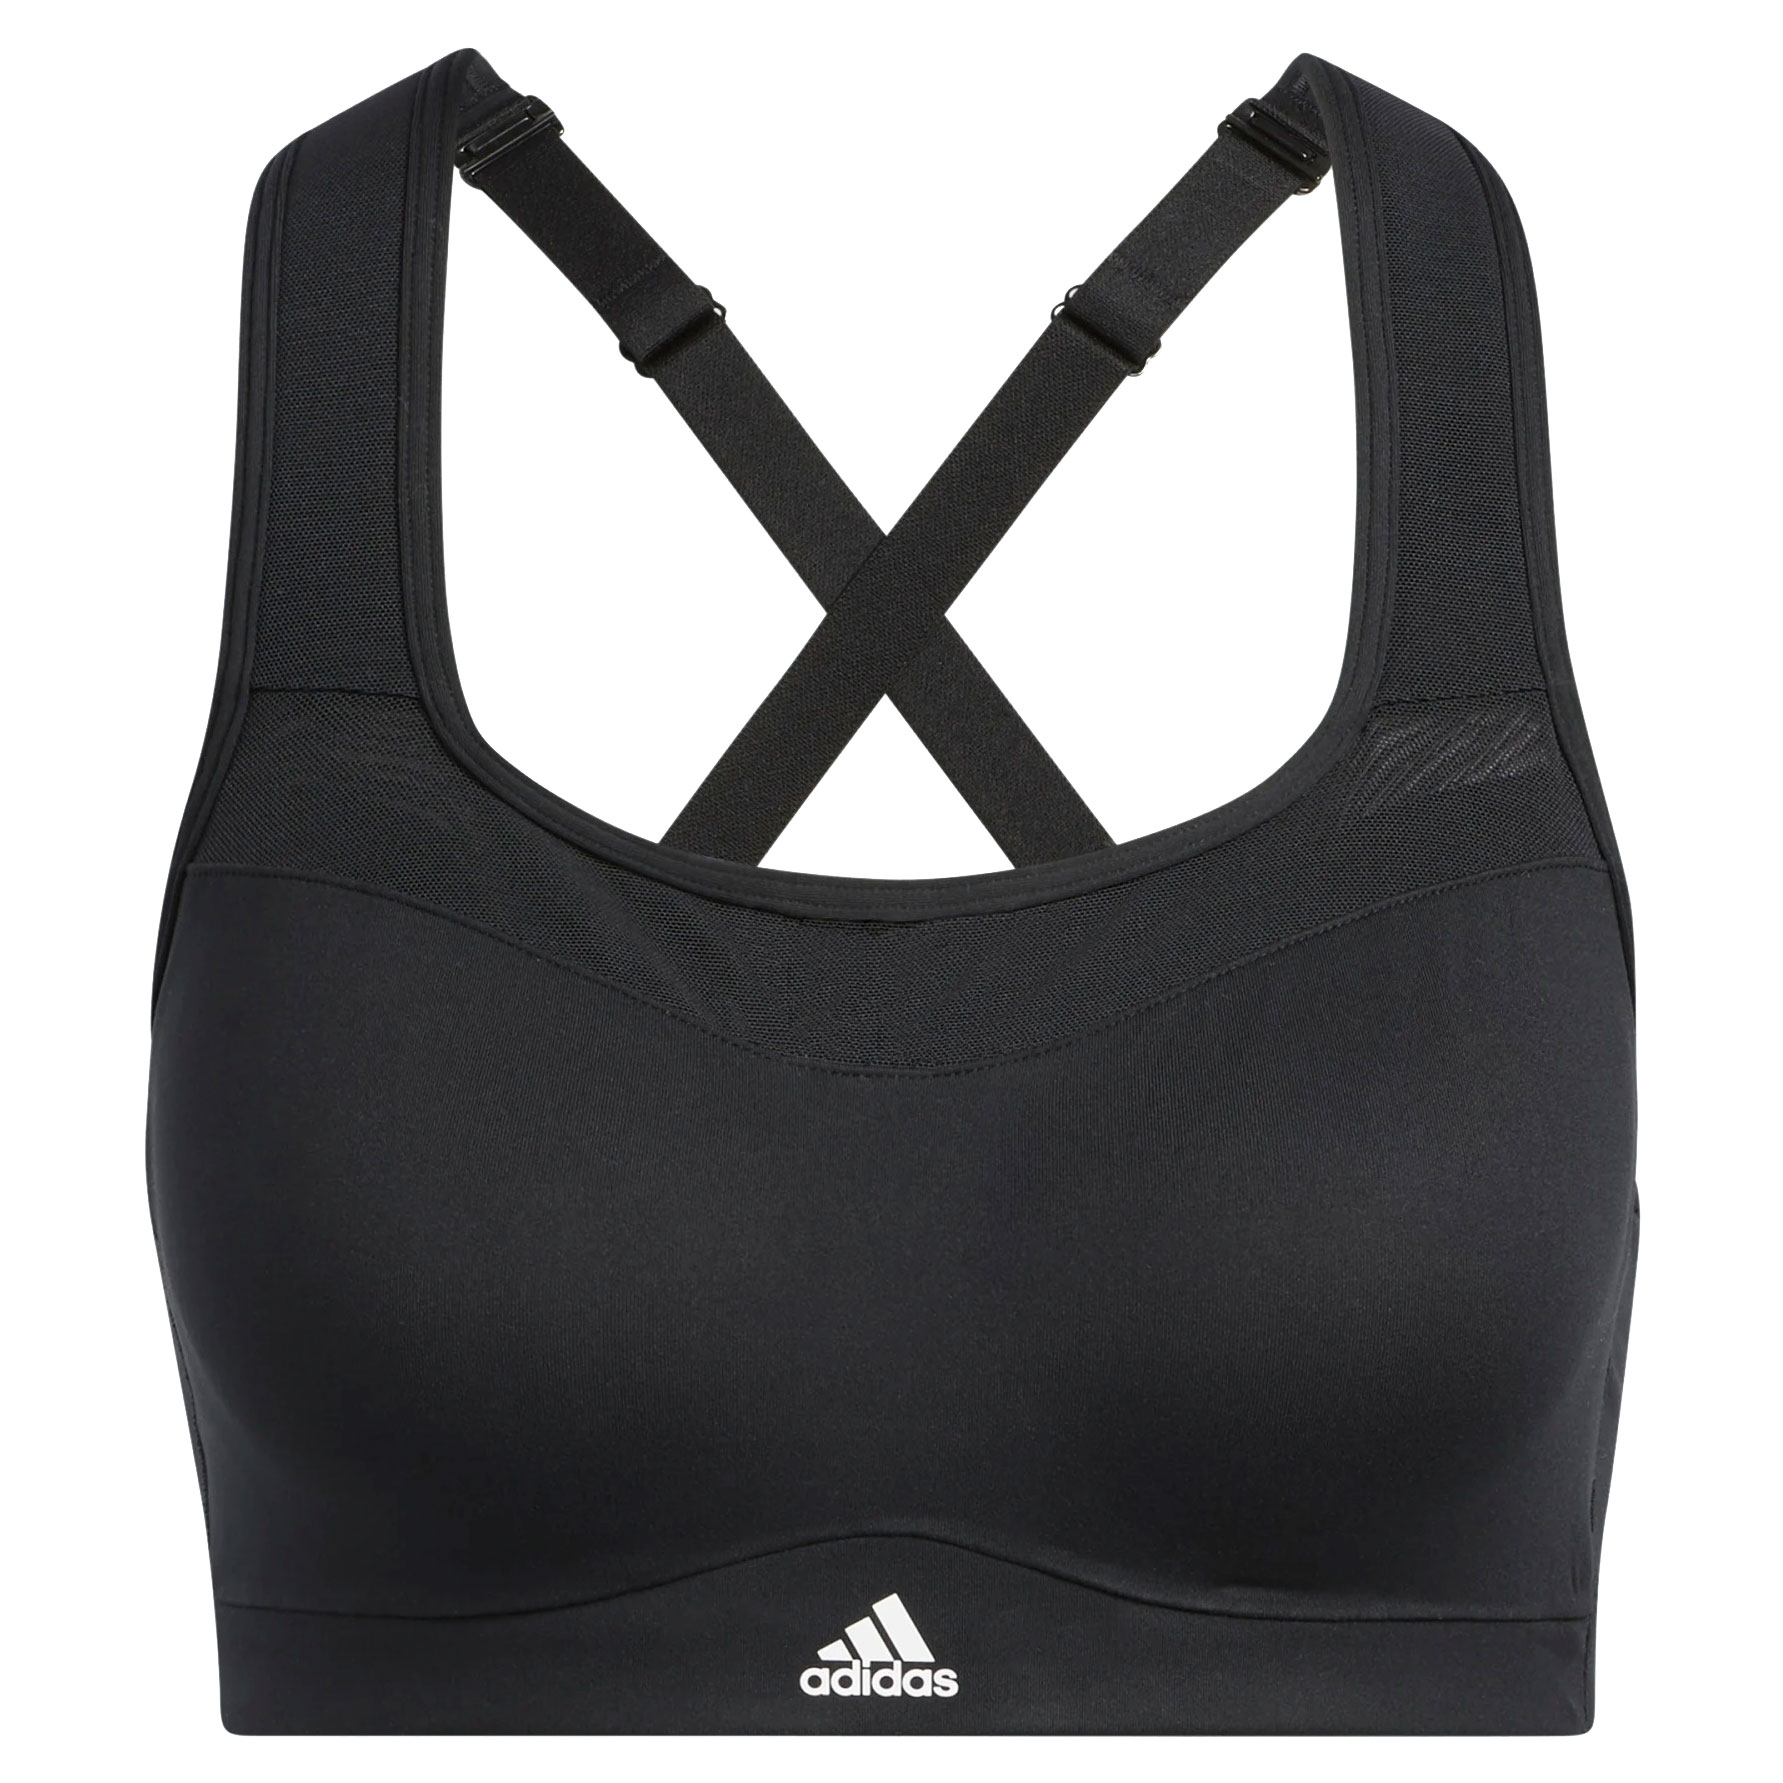 Image of adidas Women's TLRD Impact Training High-Support Sports Bra - Cup size DD - black/white HF2297